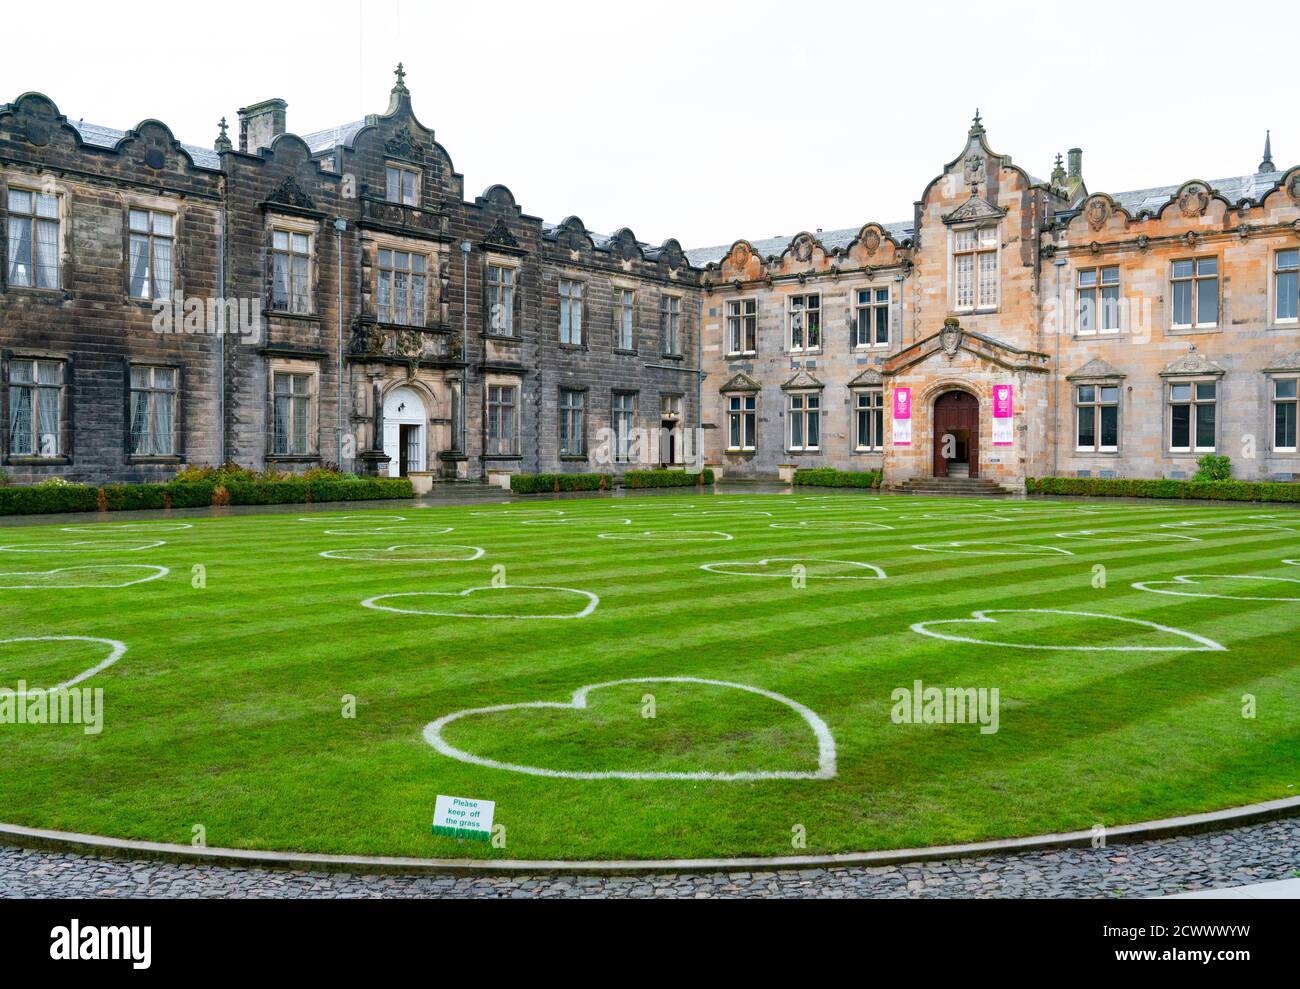 St Andrews, Scotland, UK. 30 September, 2020. Students in halls of residence at St Andrews University have been told that they can leave for home without financial penalty. The Scottish Government controversially told students in Scotland  to self-isolate in their rooms following localised outbreaks of Covid-19 amongst students.. Pictured; The lawn inside St Salvator's Quad has been marked out to ensure 2m social distancing . Iain Masterton/Alamy Live News Stock Photo